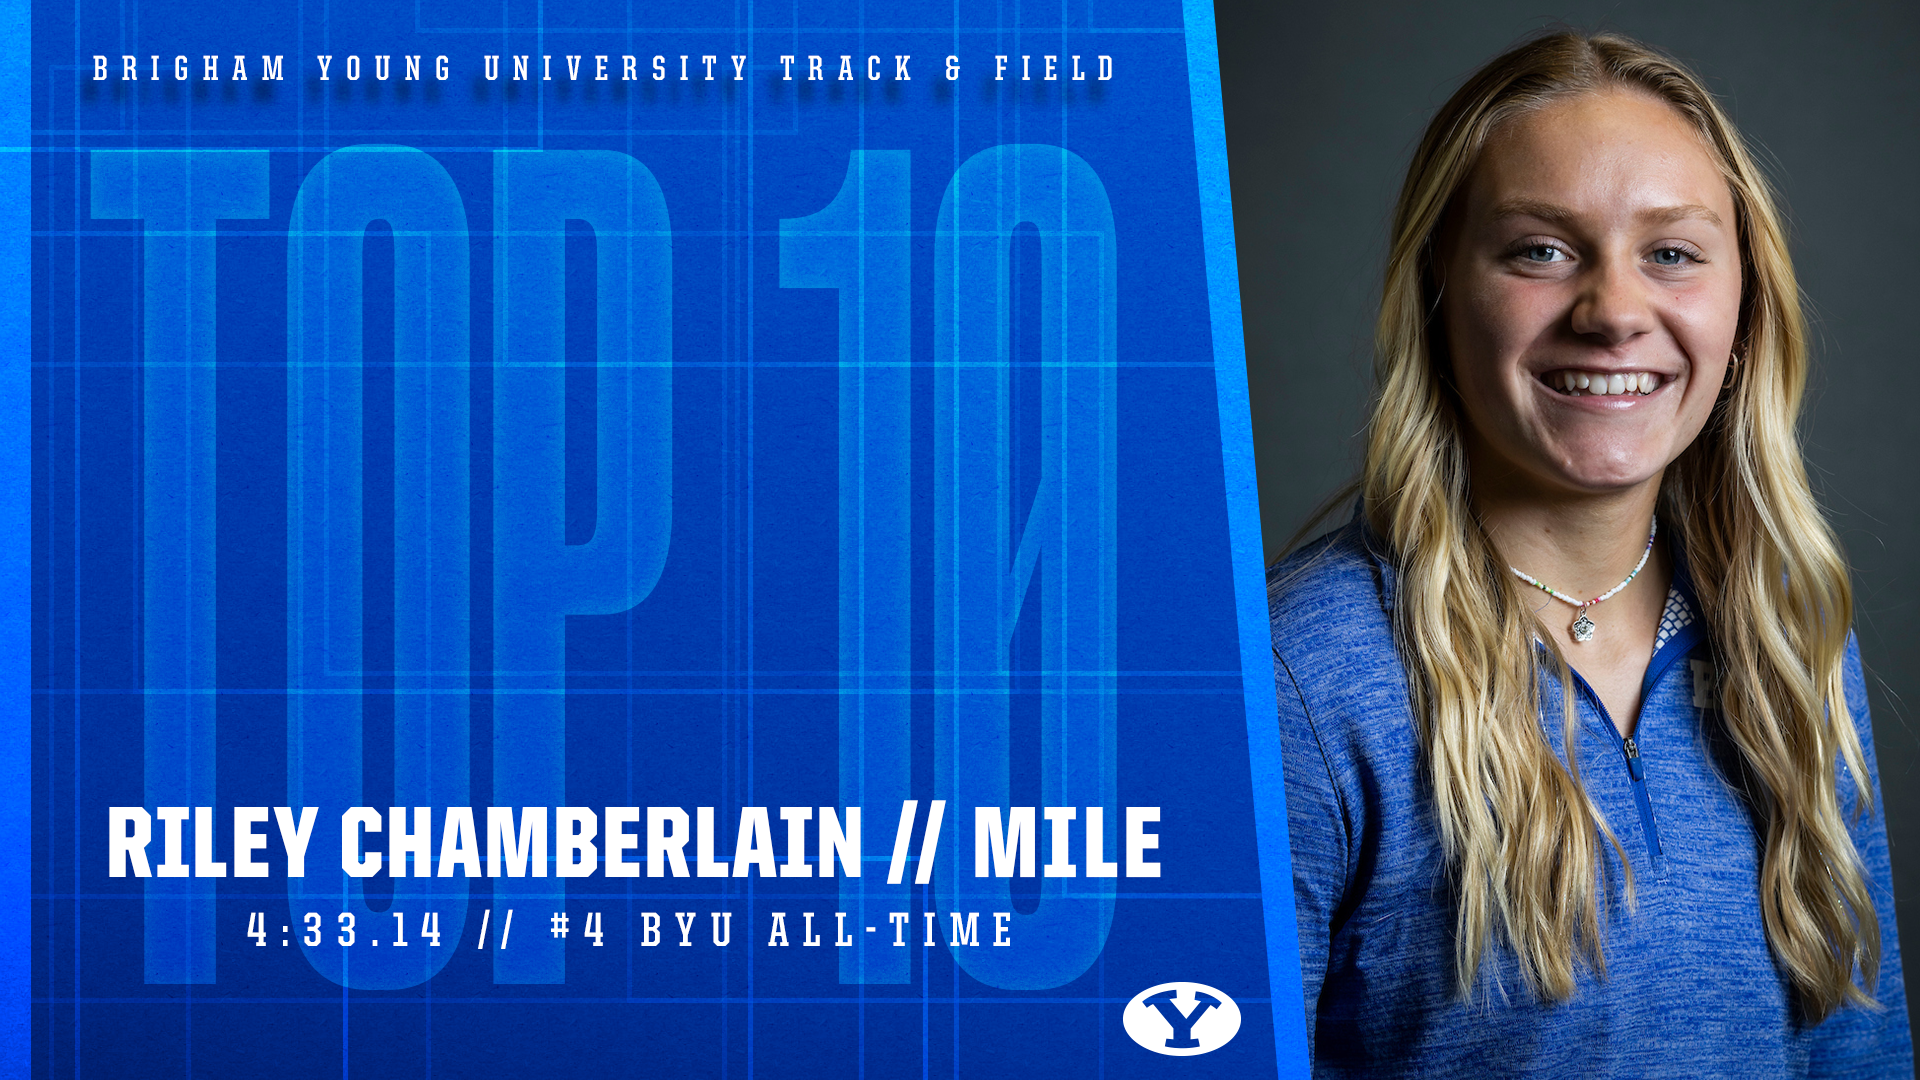 Riley Chamberlain No. 4 all-time at BYU women's indoor mile. 